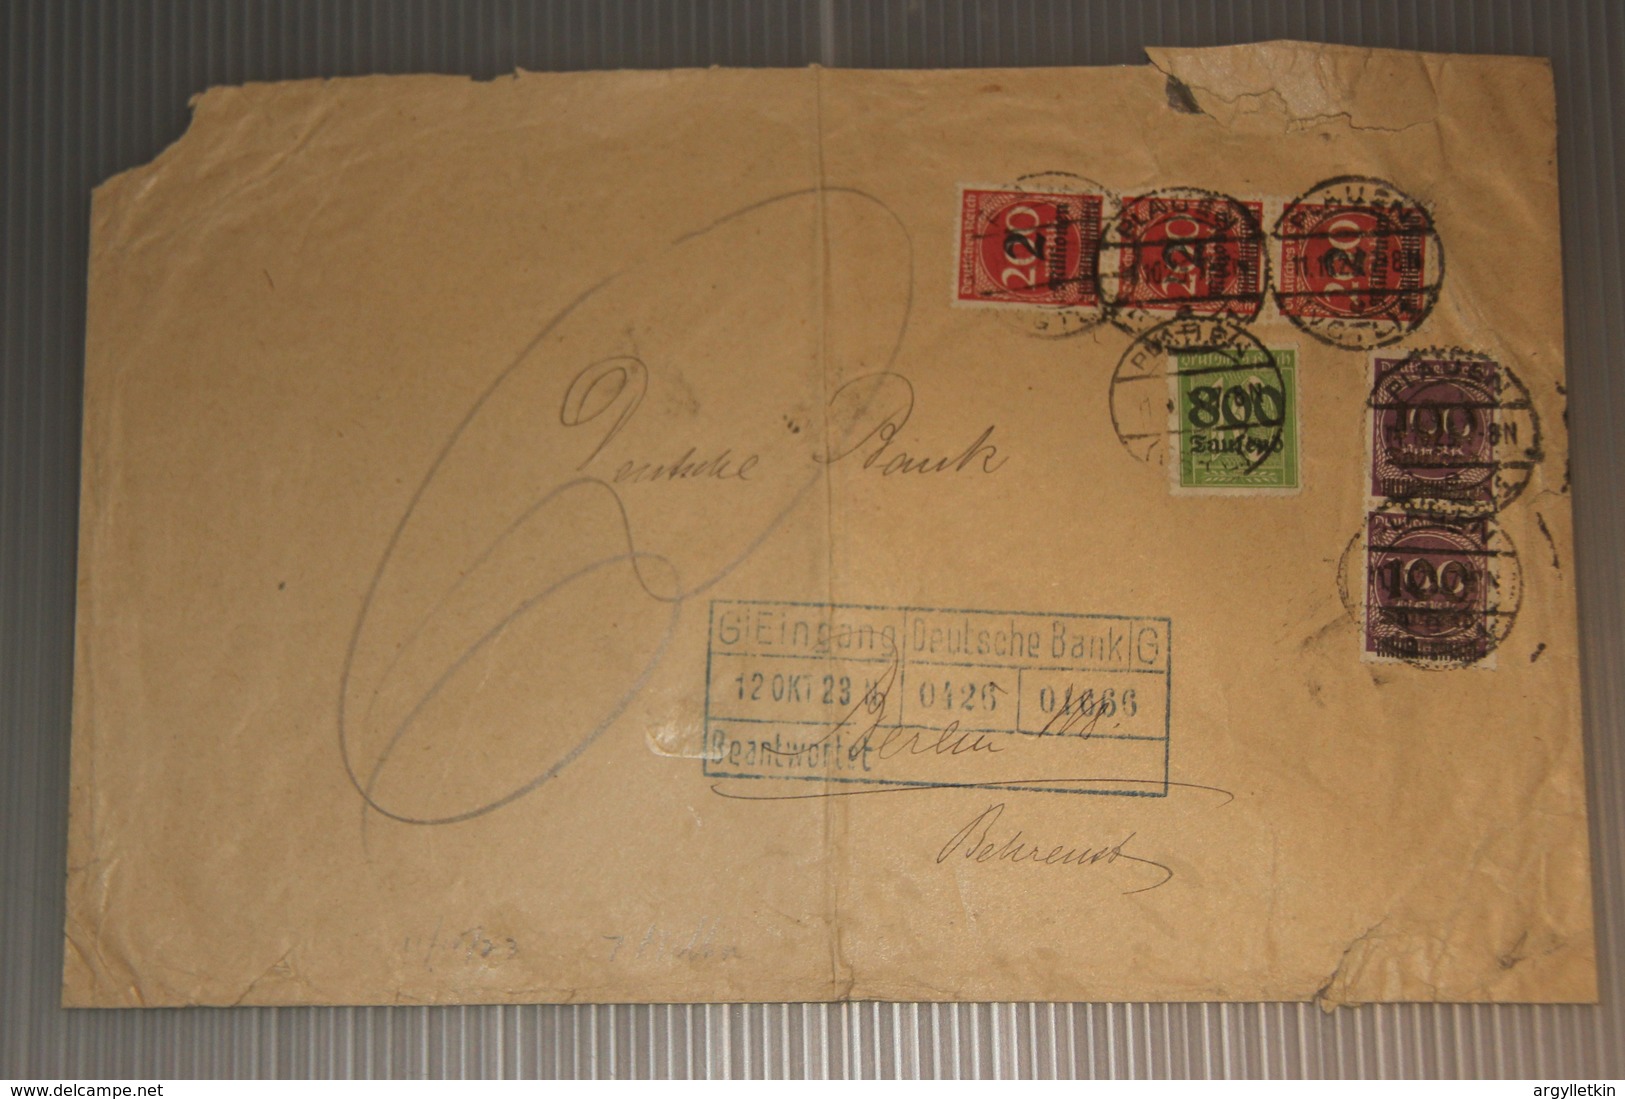 GERMANY 1923 INFLATION MAIL 10th TO 19th OCTOBER - Covers & Documents